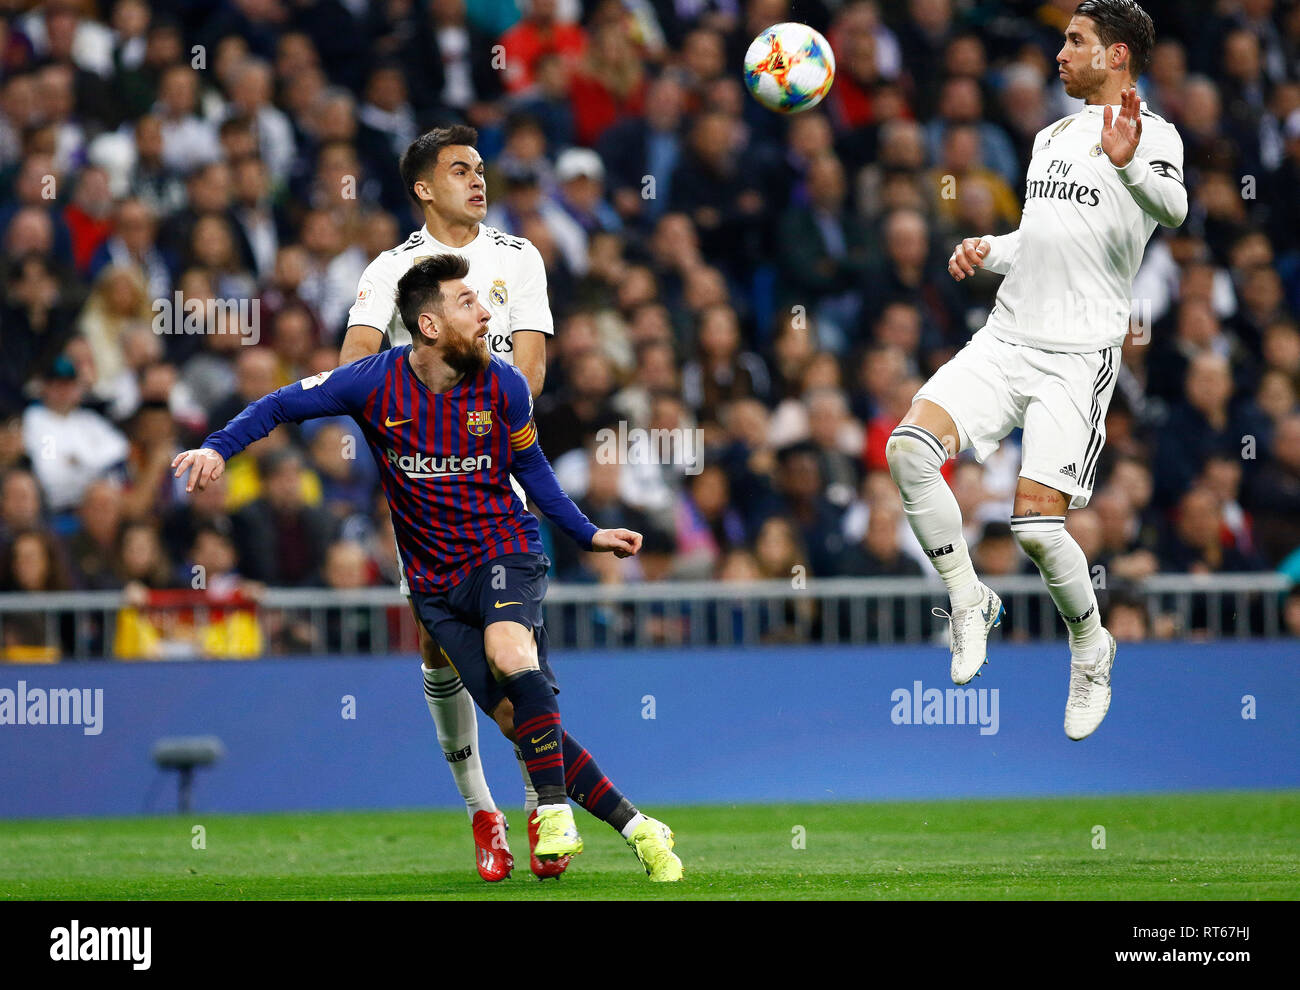 Lionel Messi in action during the Copa del Rey semi final second leg match  between Real Madrid CF and FC Barcelona at Santiago Bernabeu Stadium. (Final  score Real Madrid 0-3 FC Barcelona